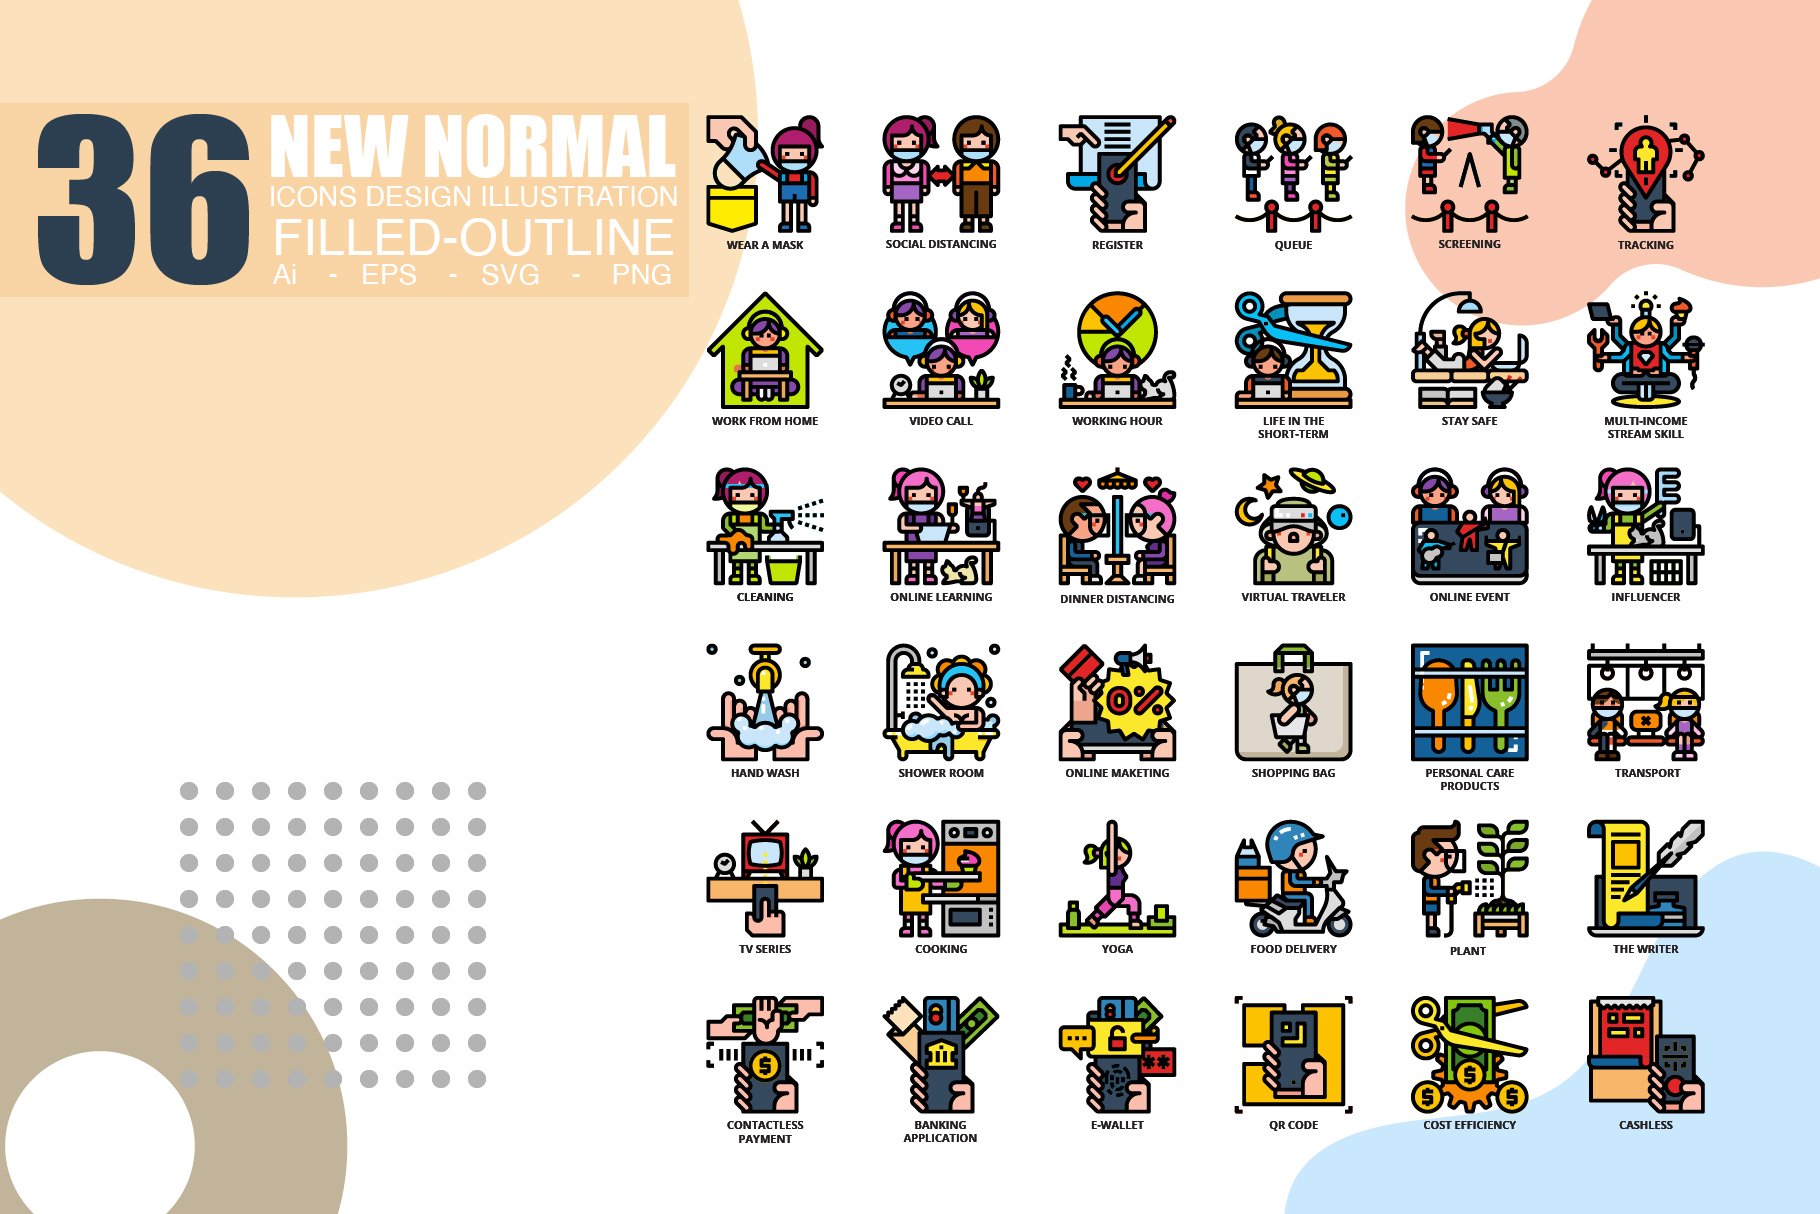 36 New Normal Icons x 3 style cover image.